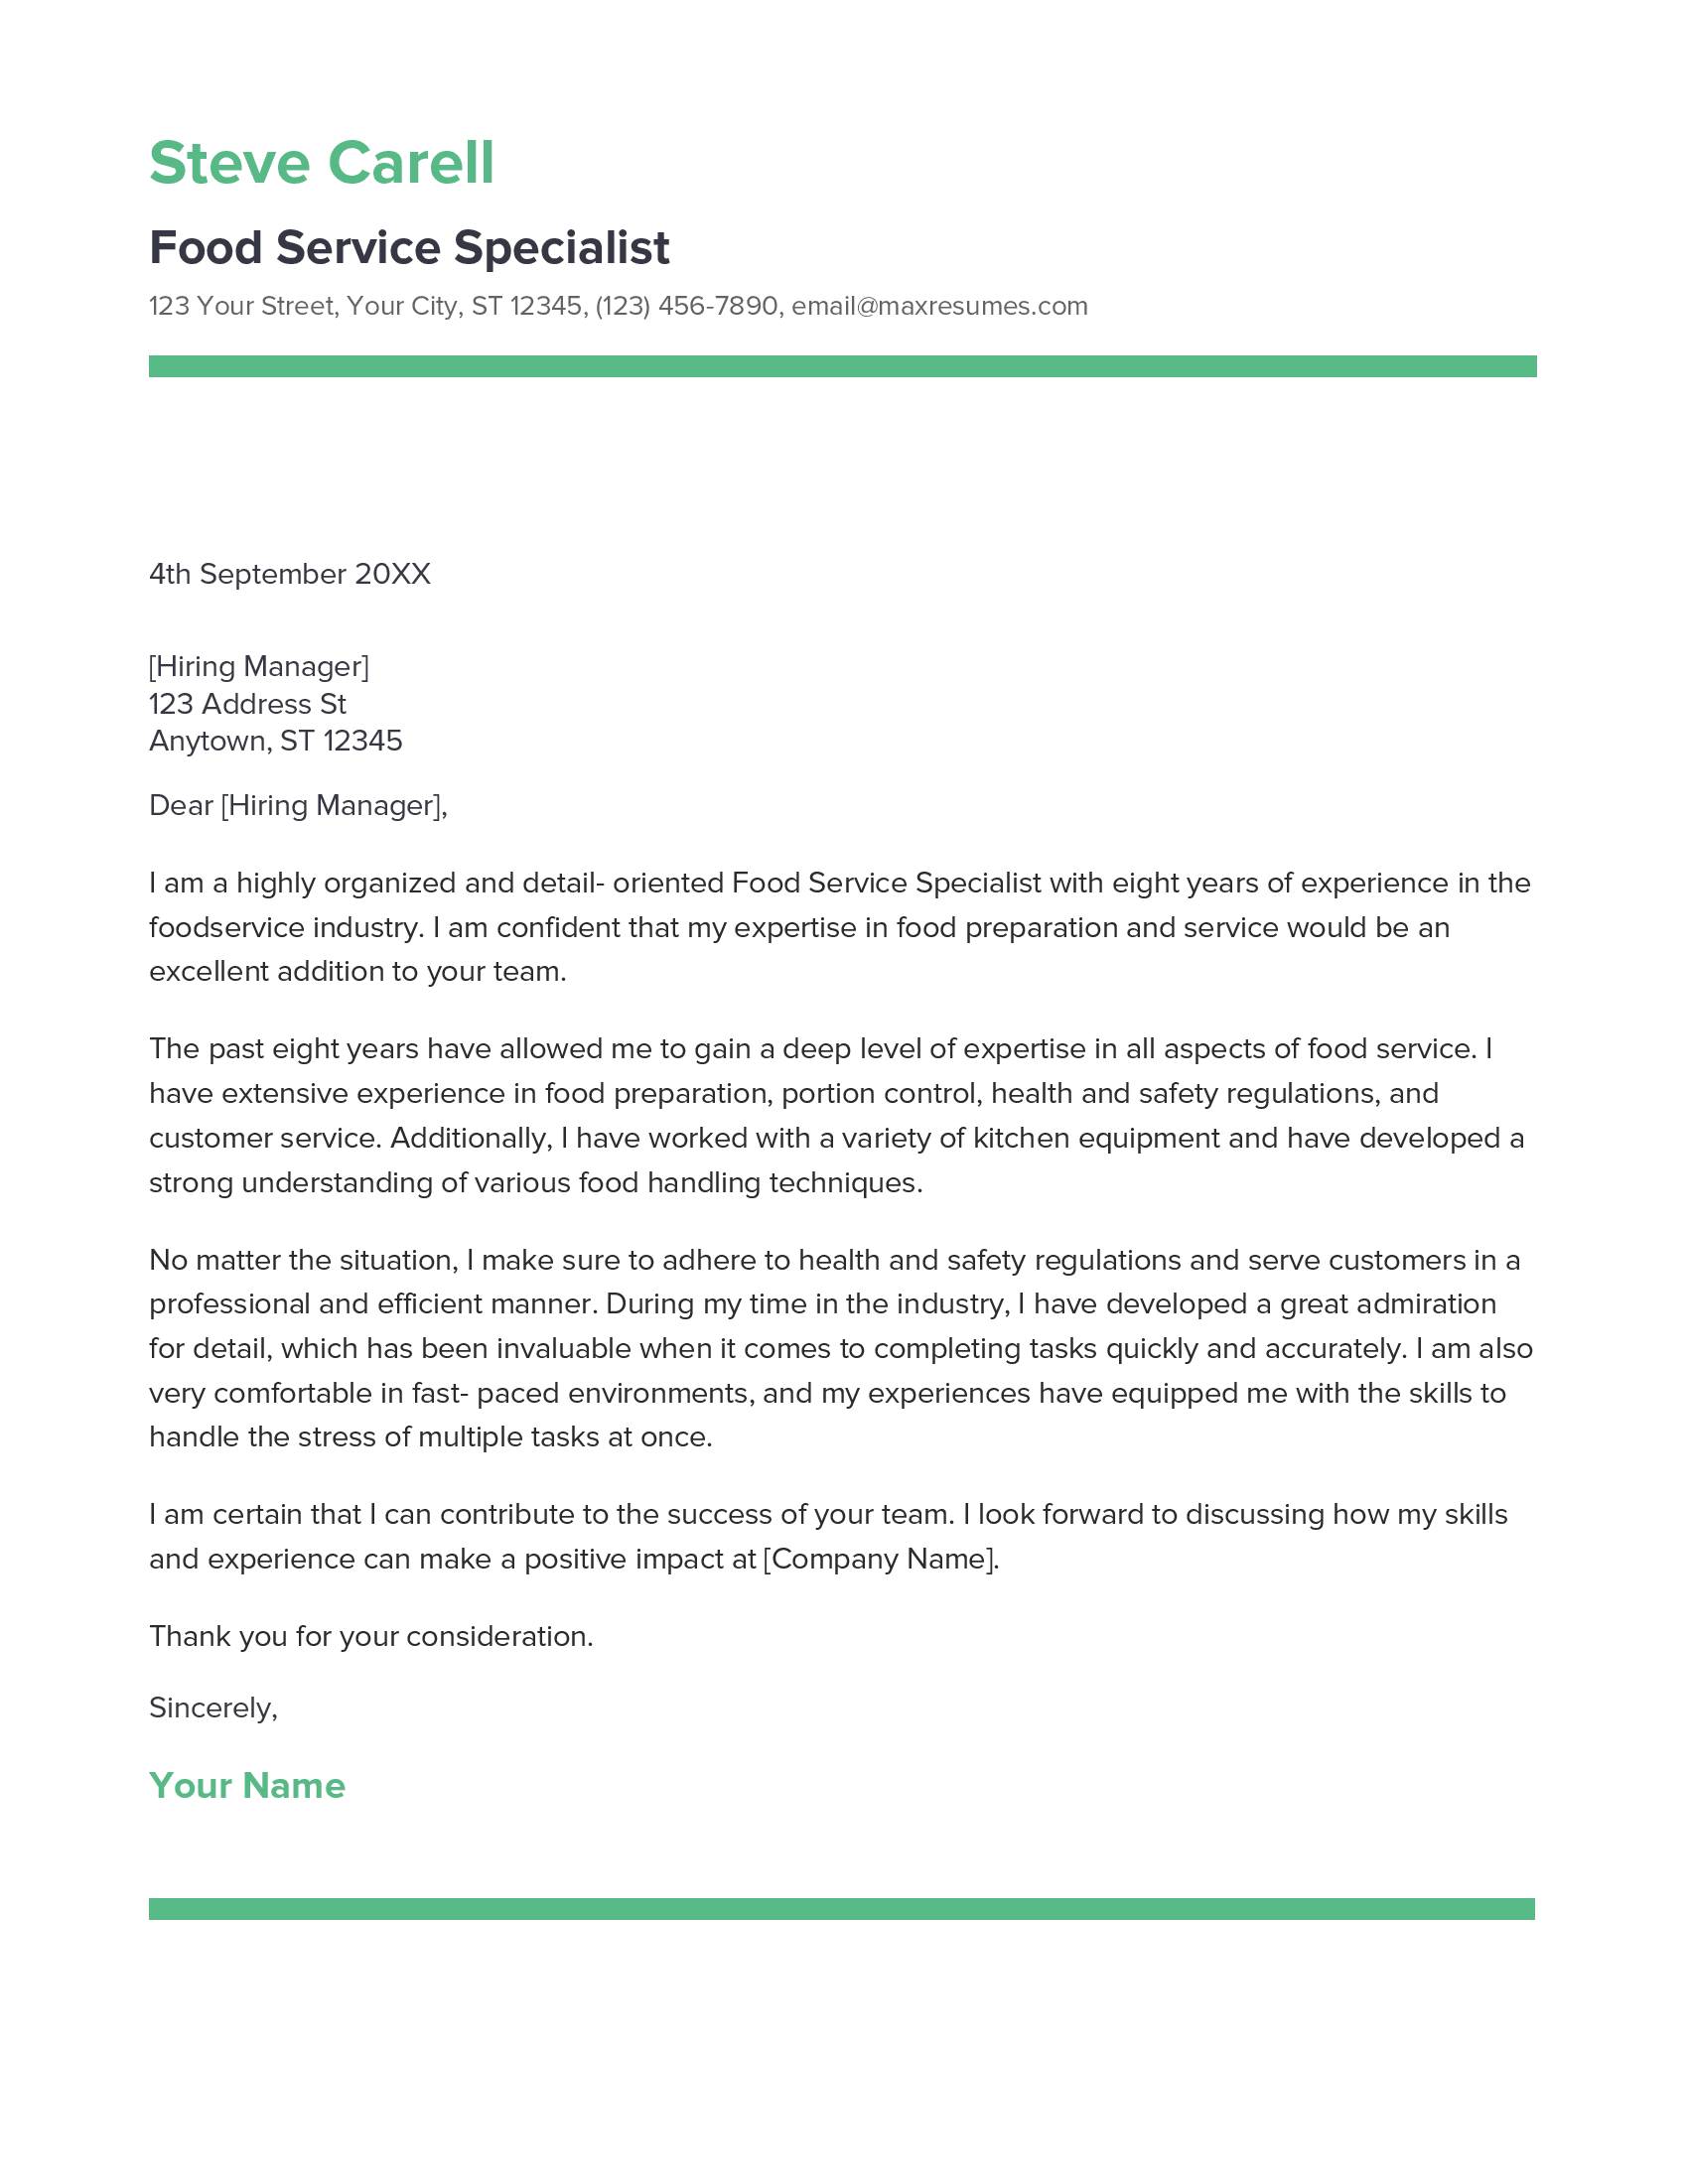 Food Service Specialist Cover Letter Example